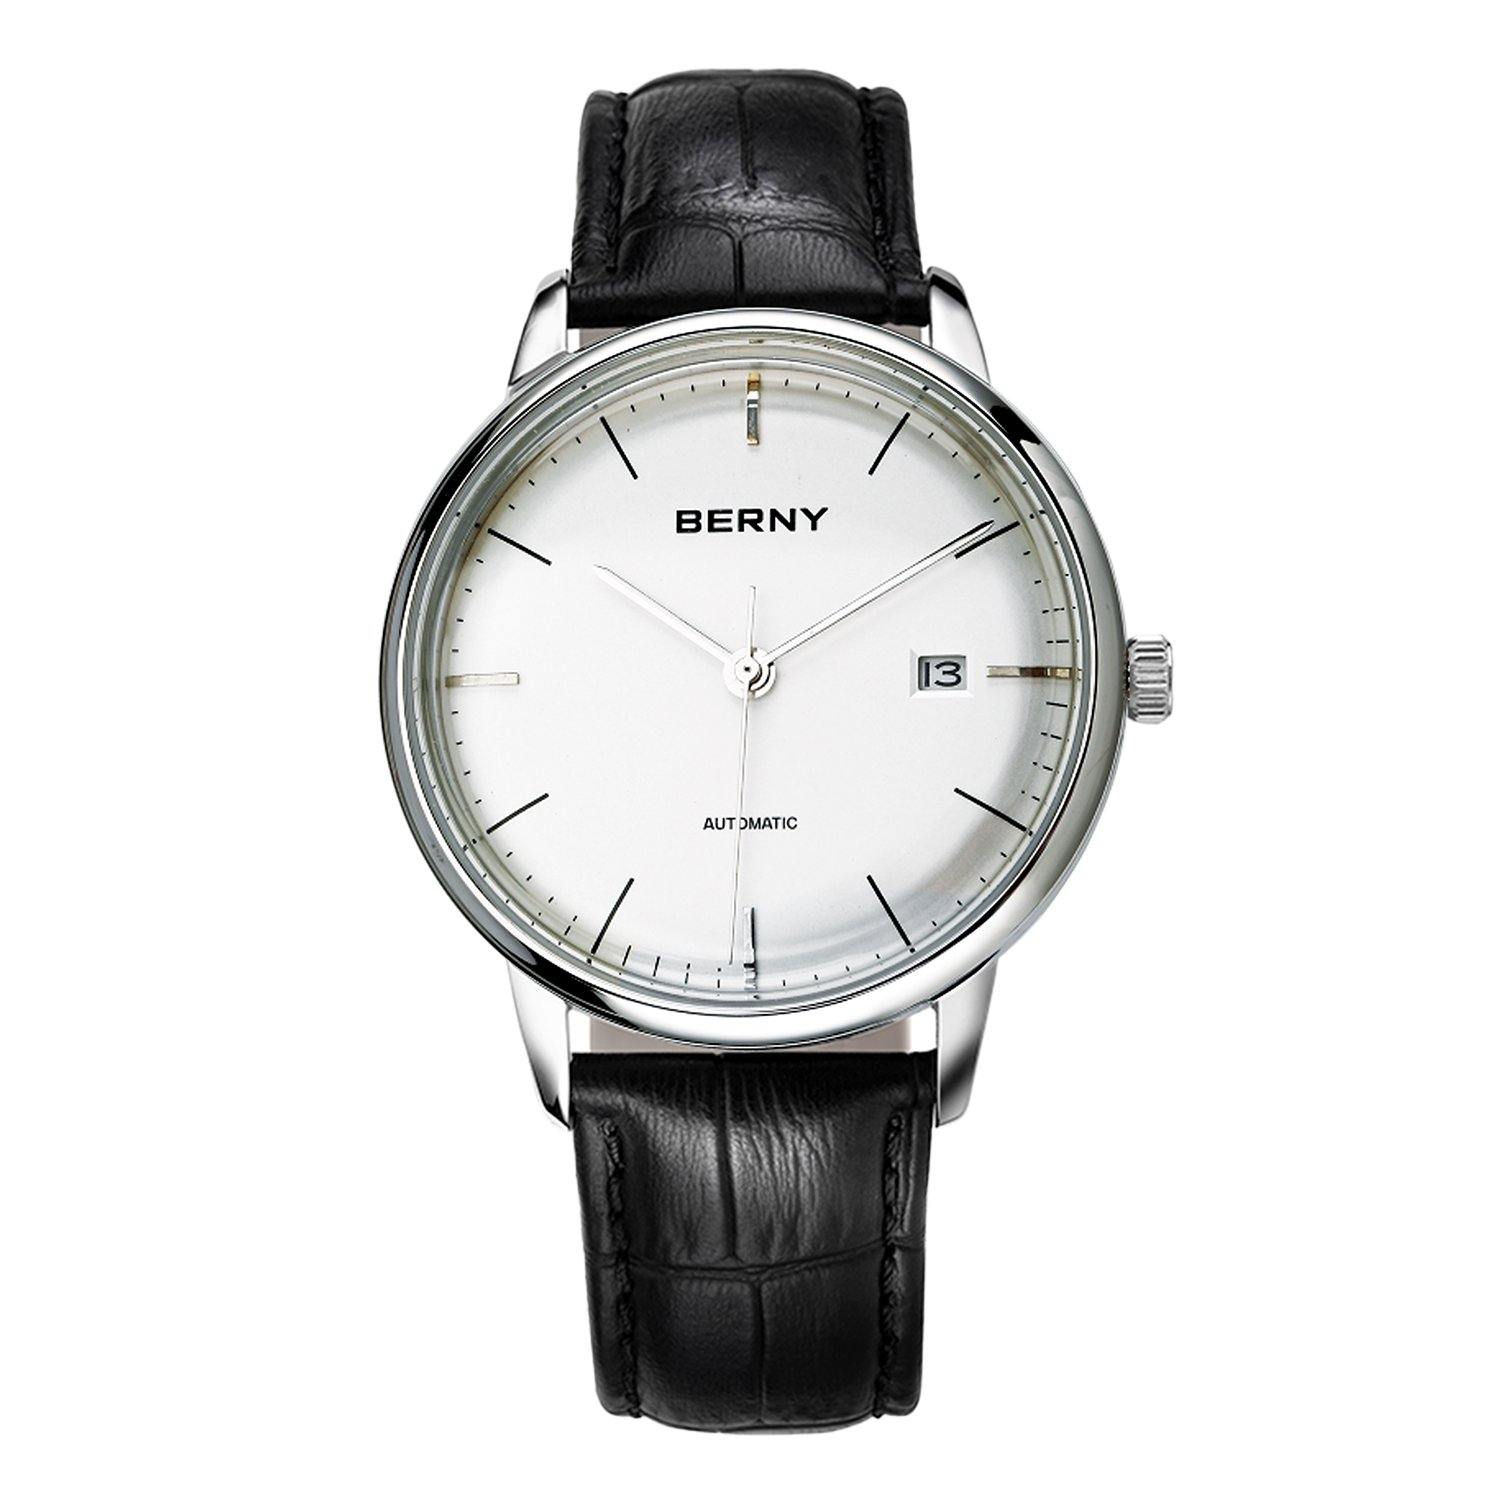 Berny-Men Automatic Business Watch-AM012M - BERNY® WATCH Official Store